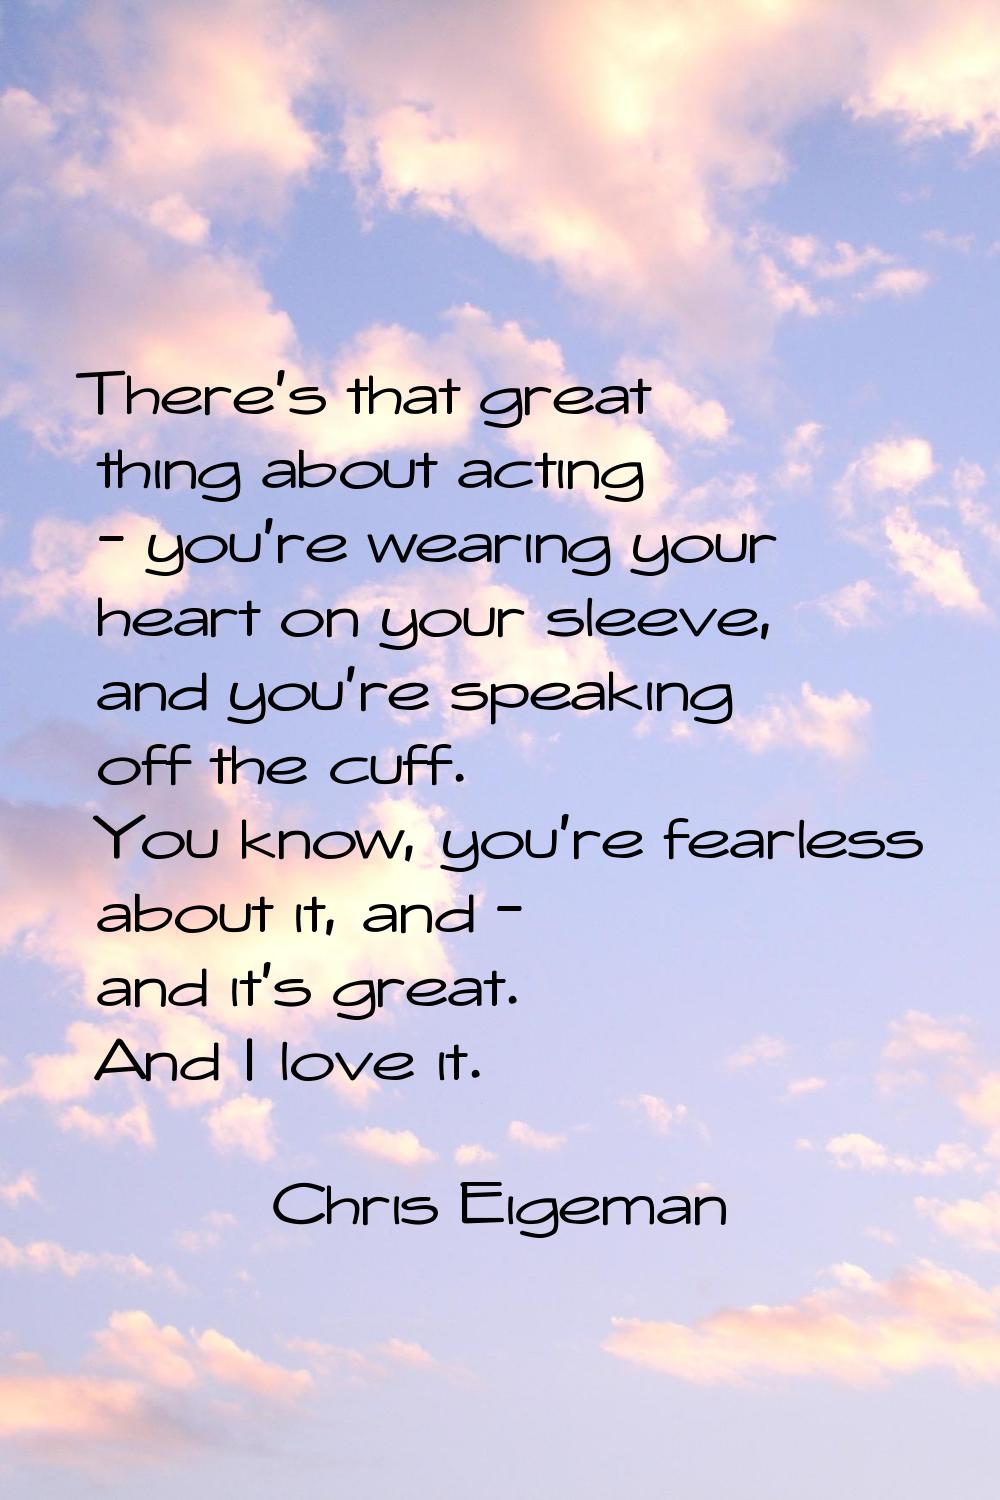 There's that great thing about acting - you're wearing your heart on your sleeve, and you're speaki